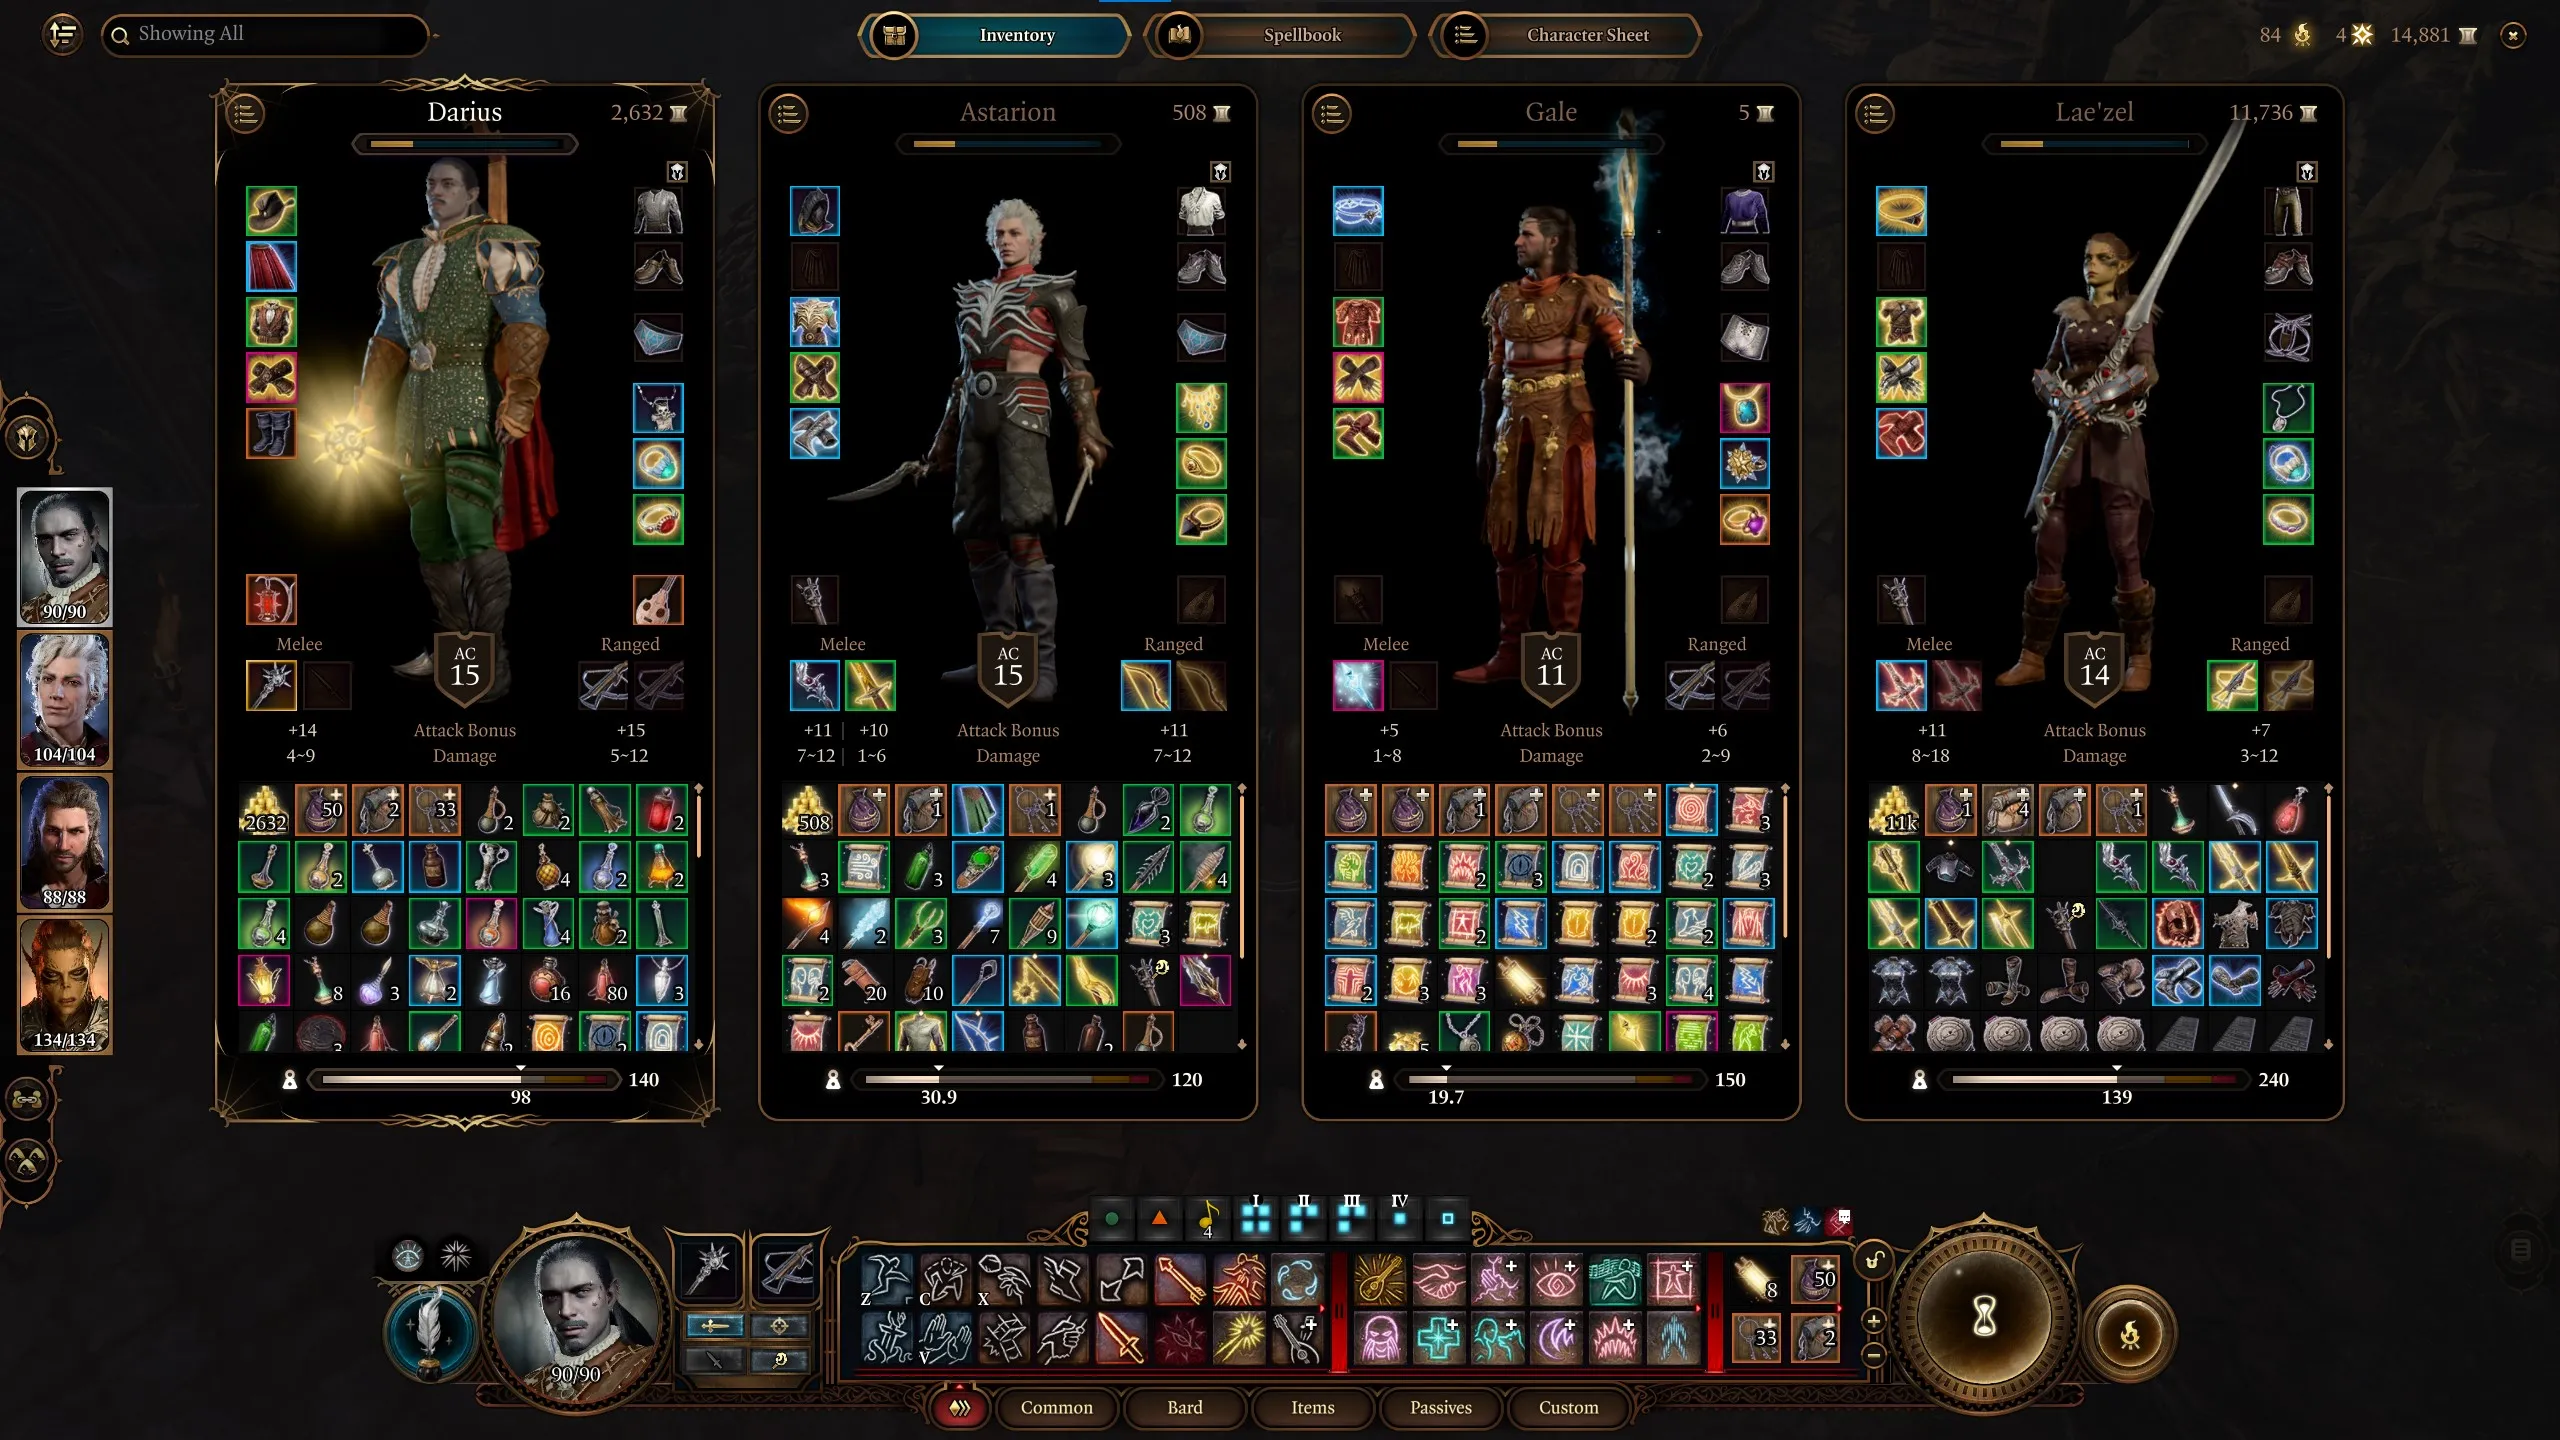 An image of the player character's party in Baldur's Gate 3.